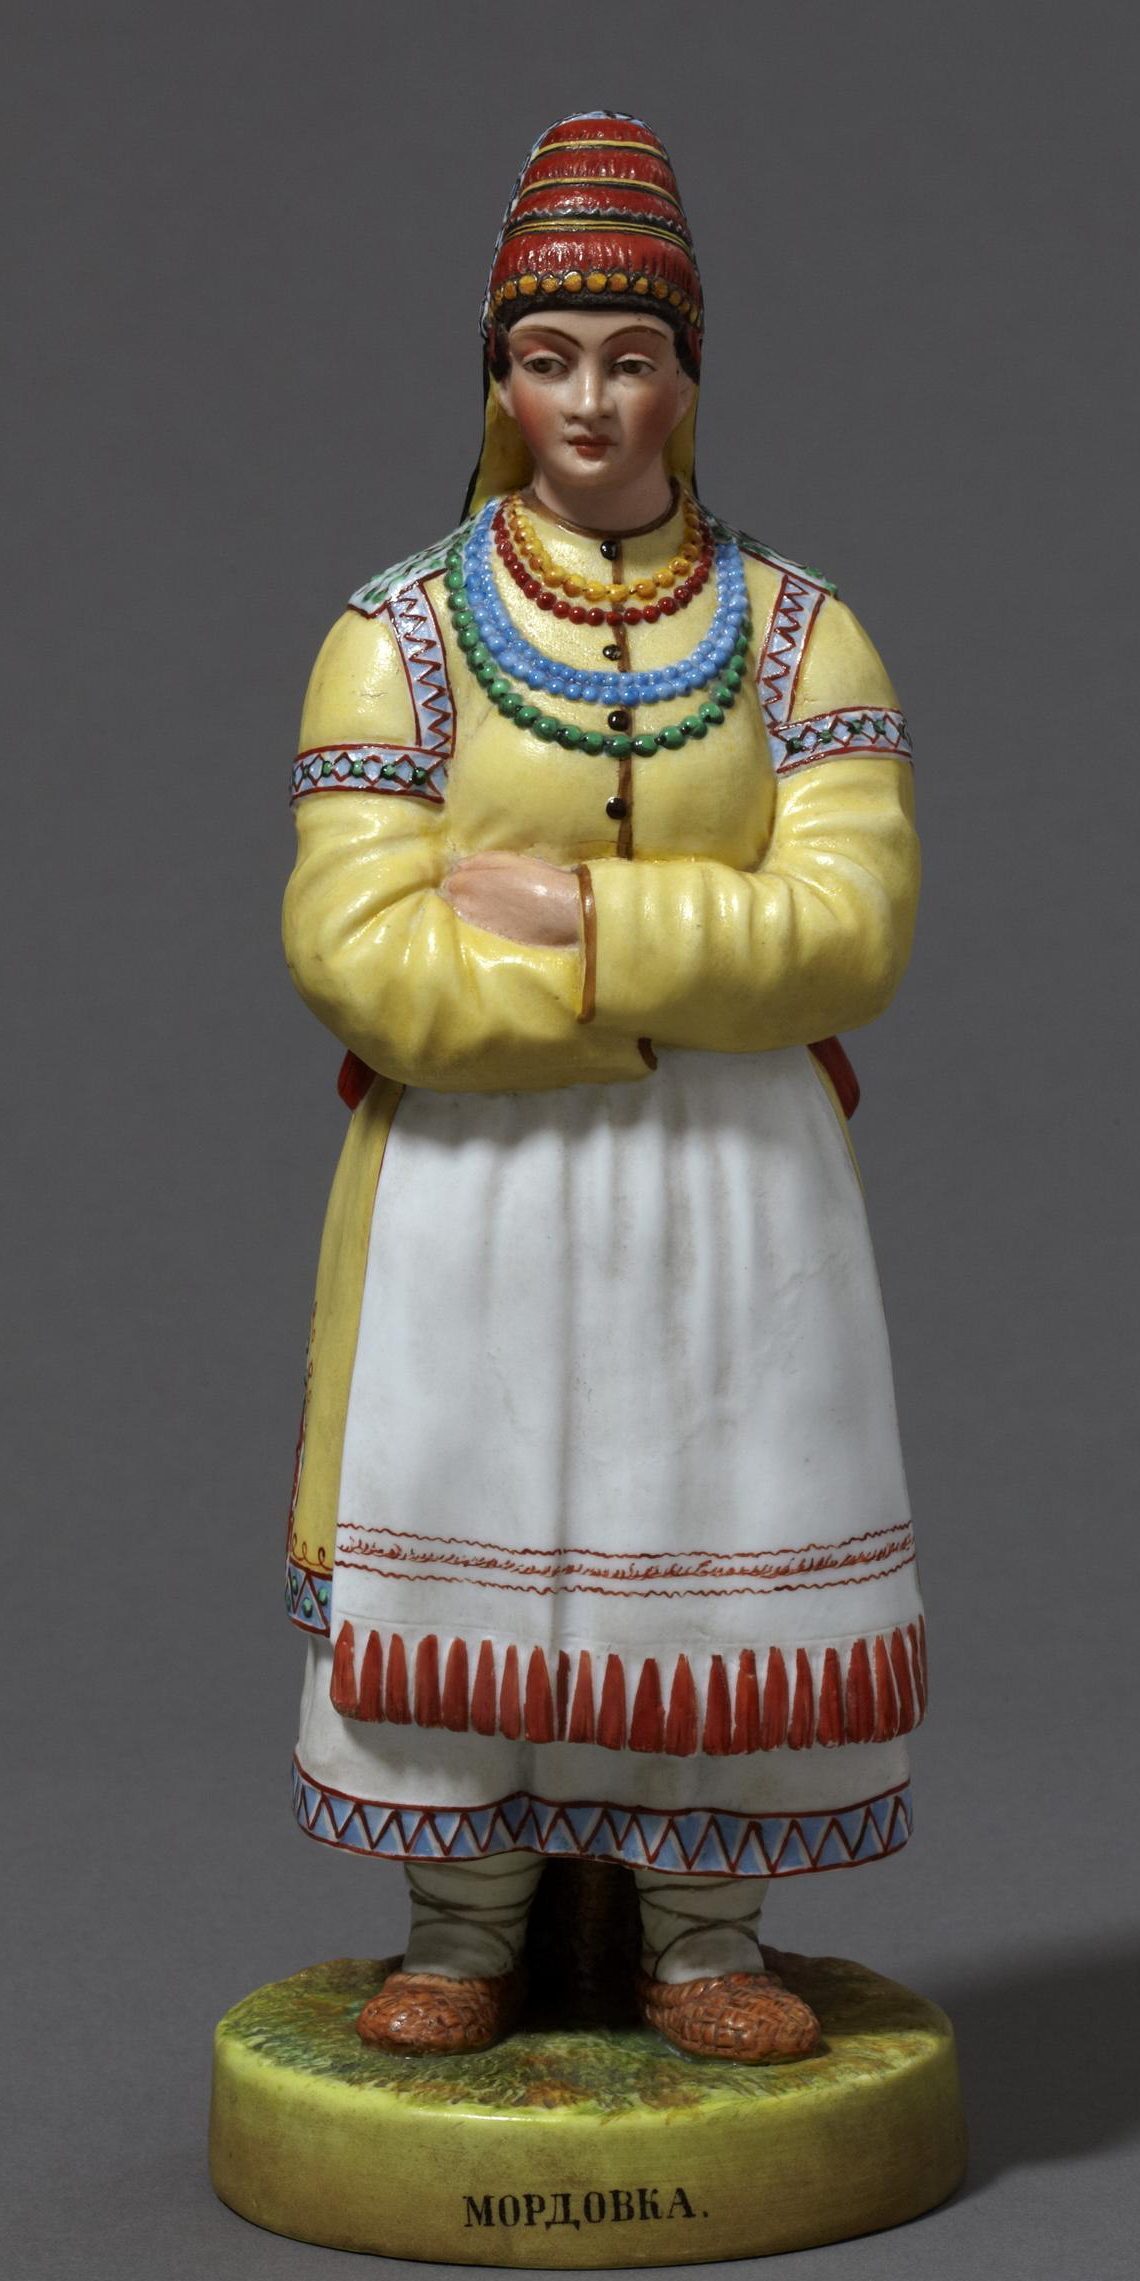 Gardner porcelain figure Mordovka from Peoples of Russia series